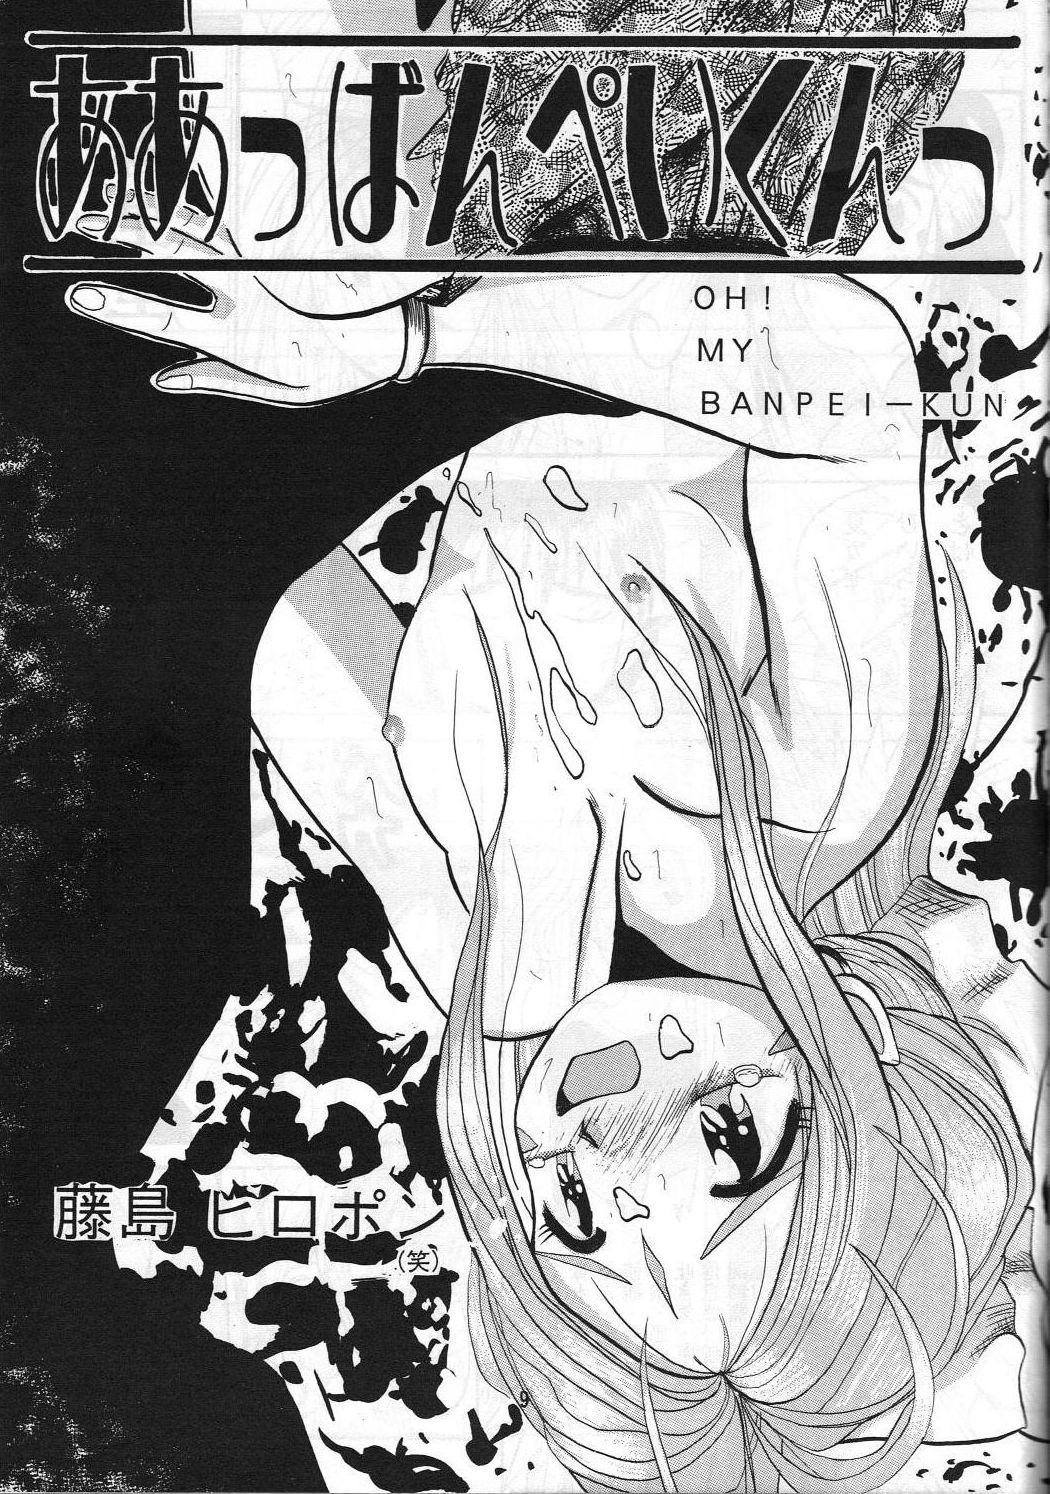 Hot Whores Release-1 - Ah my goddess Tenchi muyo Slutty - Page 10